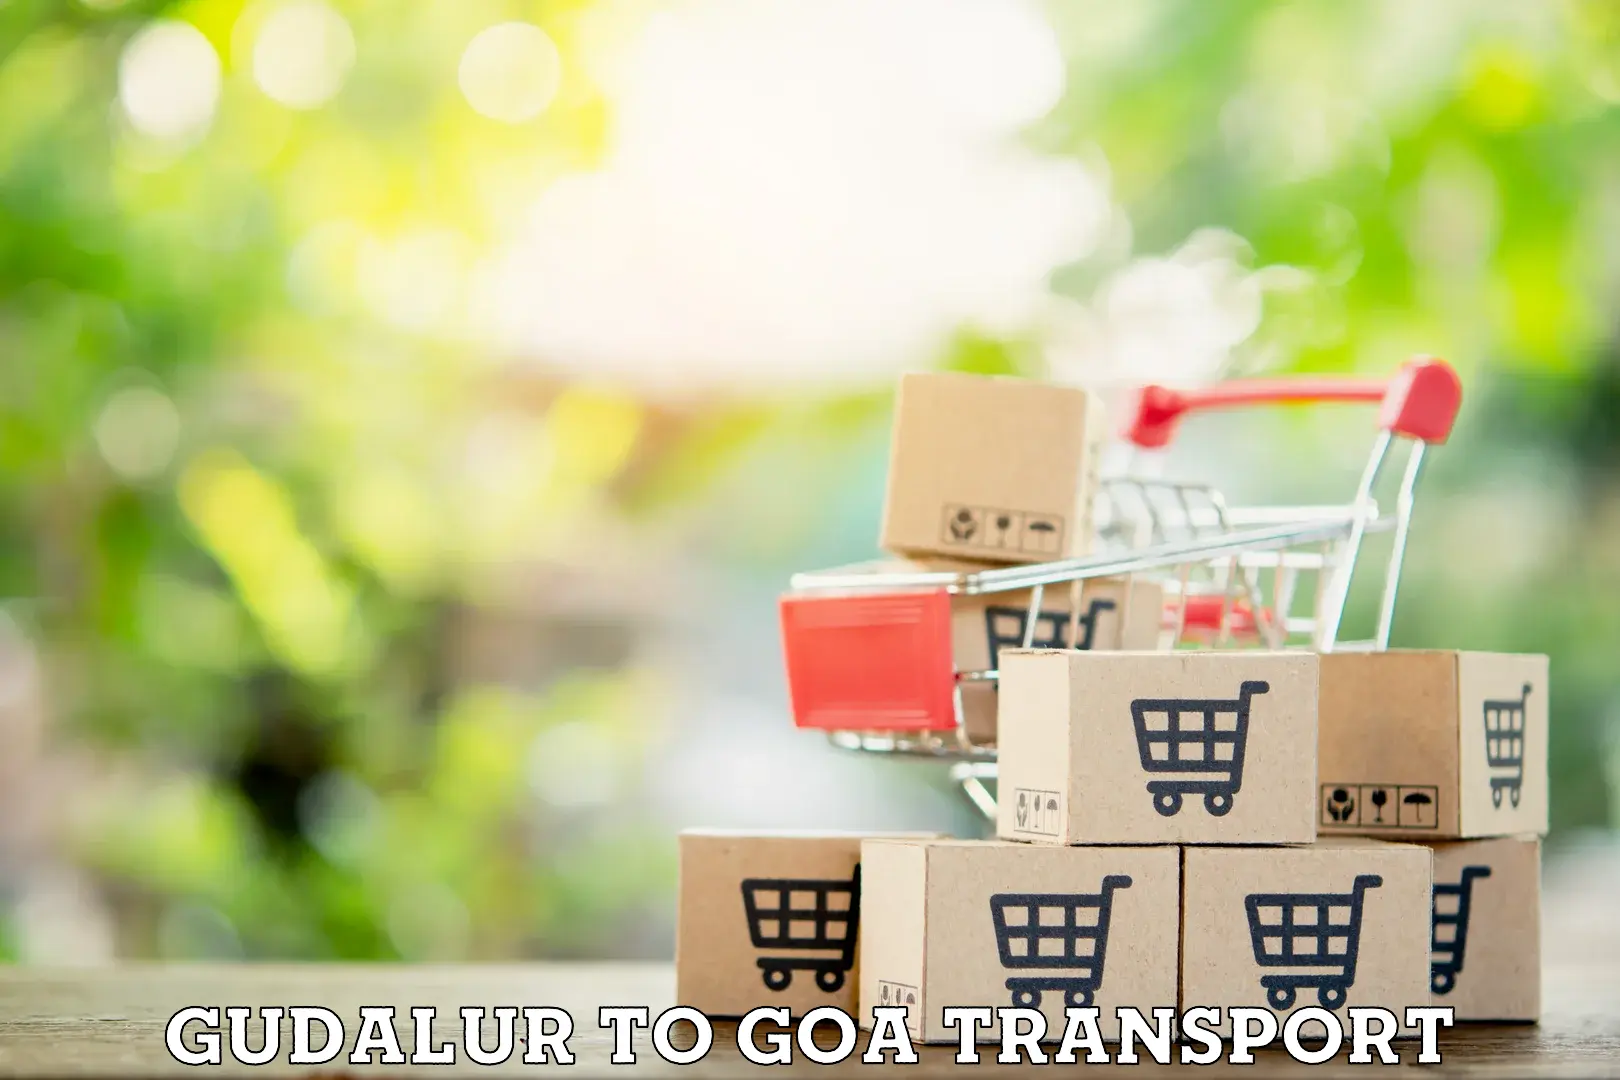 Transport bike from one state to another Gudalur to Goa